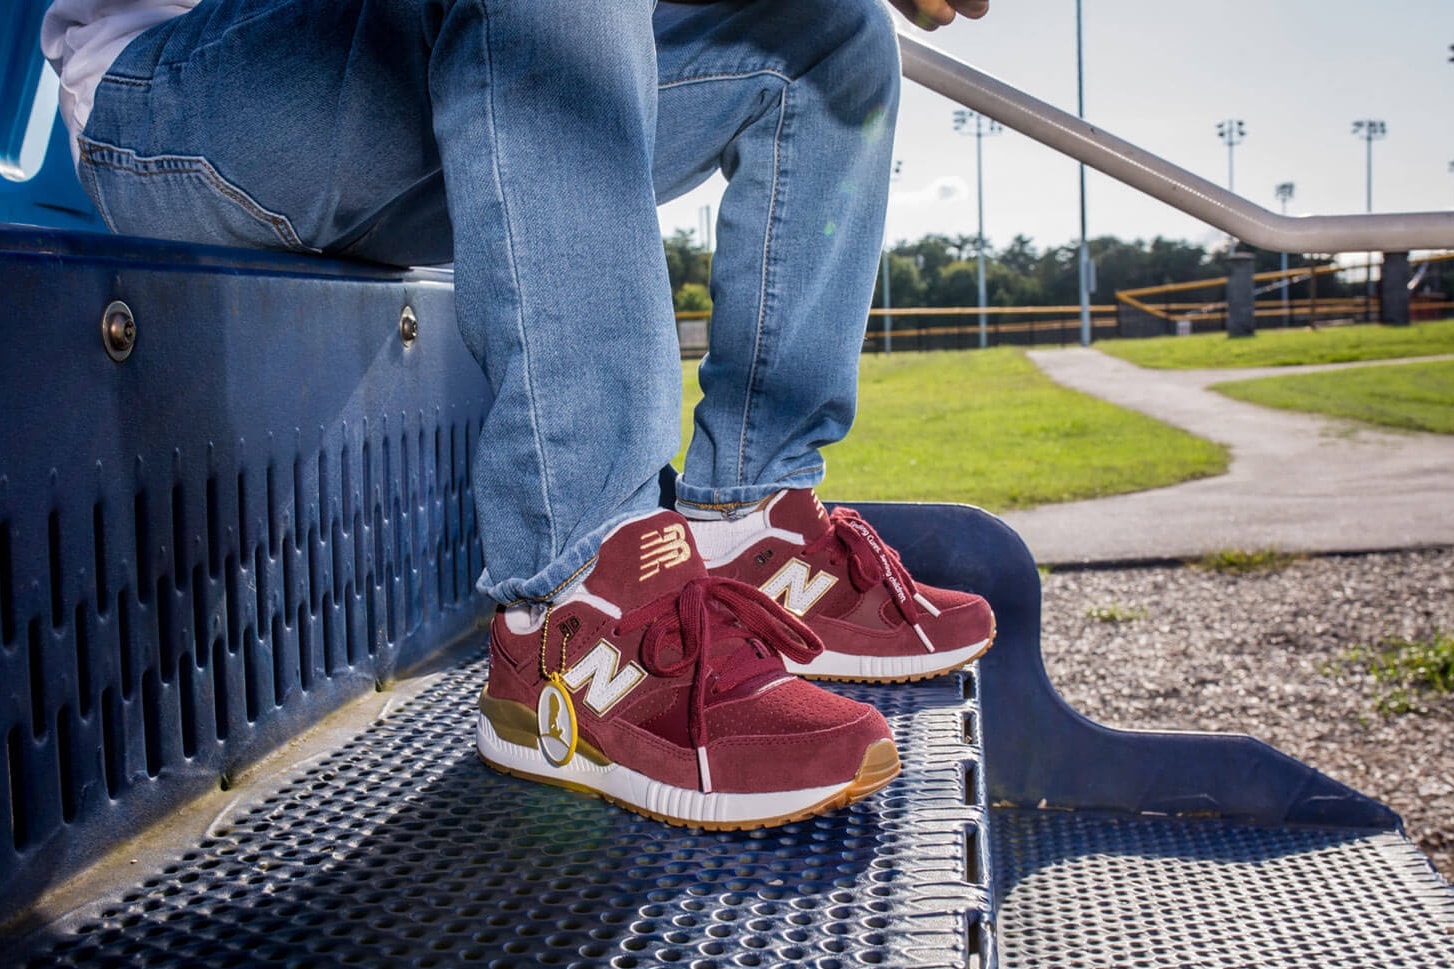 DTLR New Balance 530 St Jude Childrens Research Hospital Charity Premium Burgundy Release Info Drops September 29